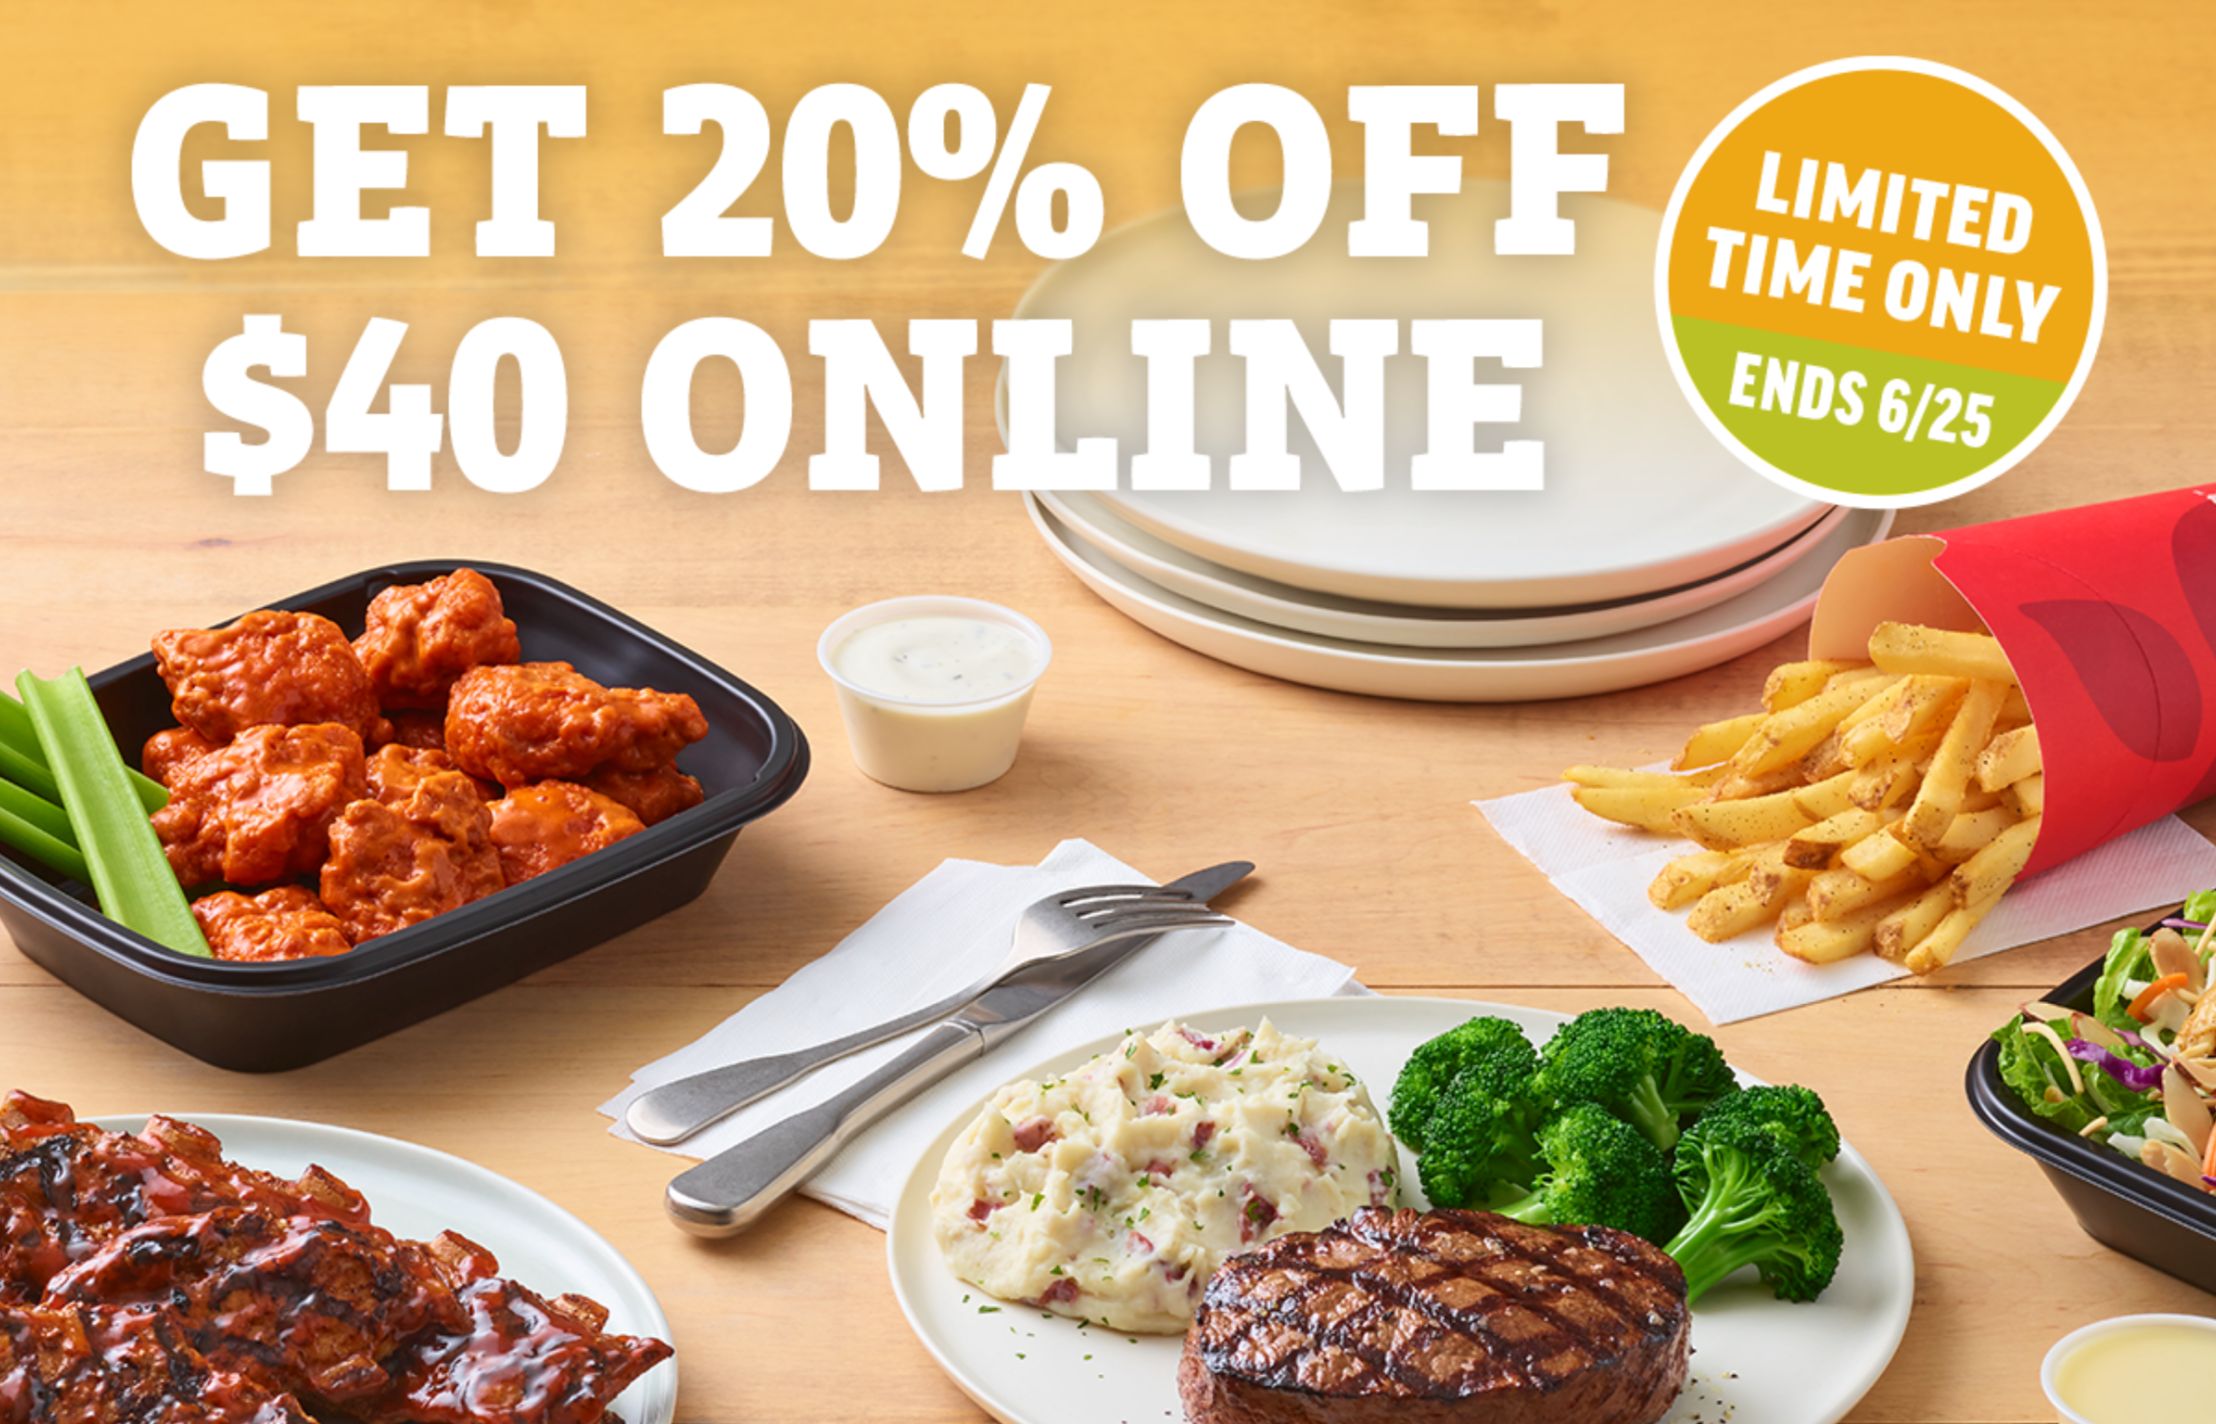 Applebee’s Offers 20% Off Online and In-app Orders with a New Promo Code Through to June 25